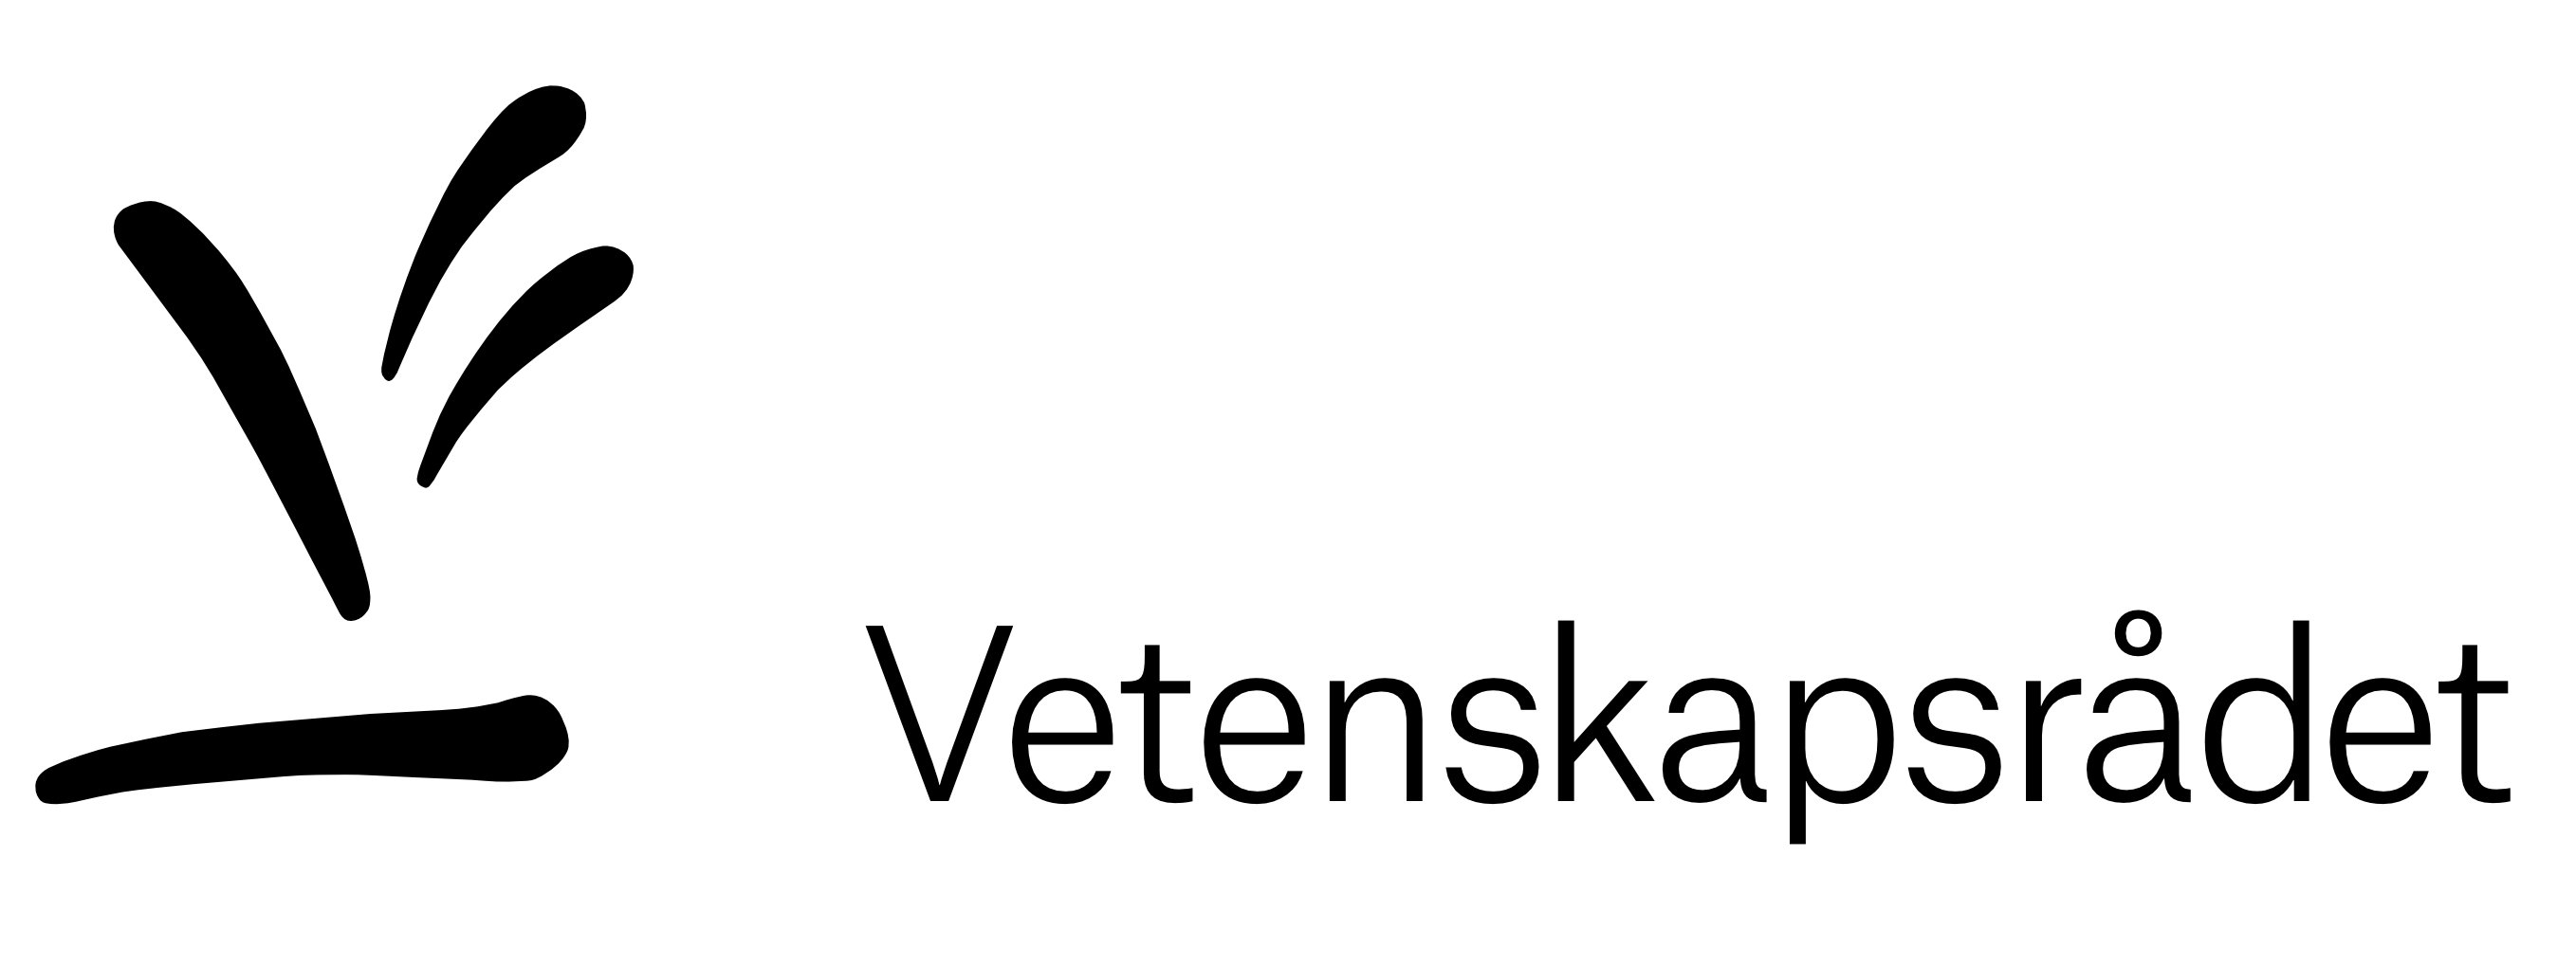 Swedish Research Council logotype and link